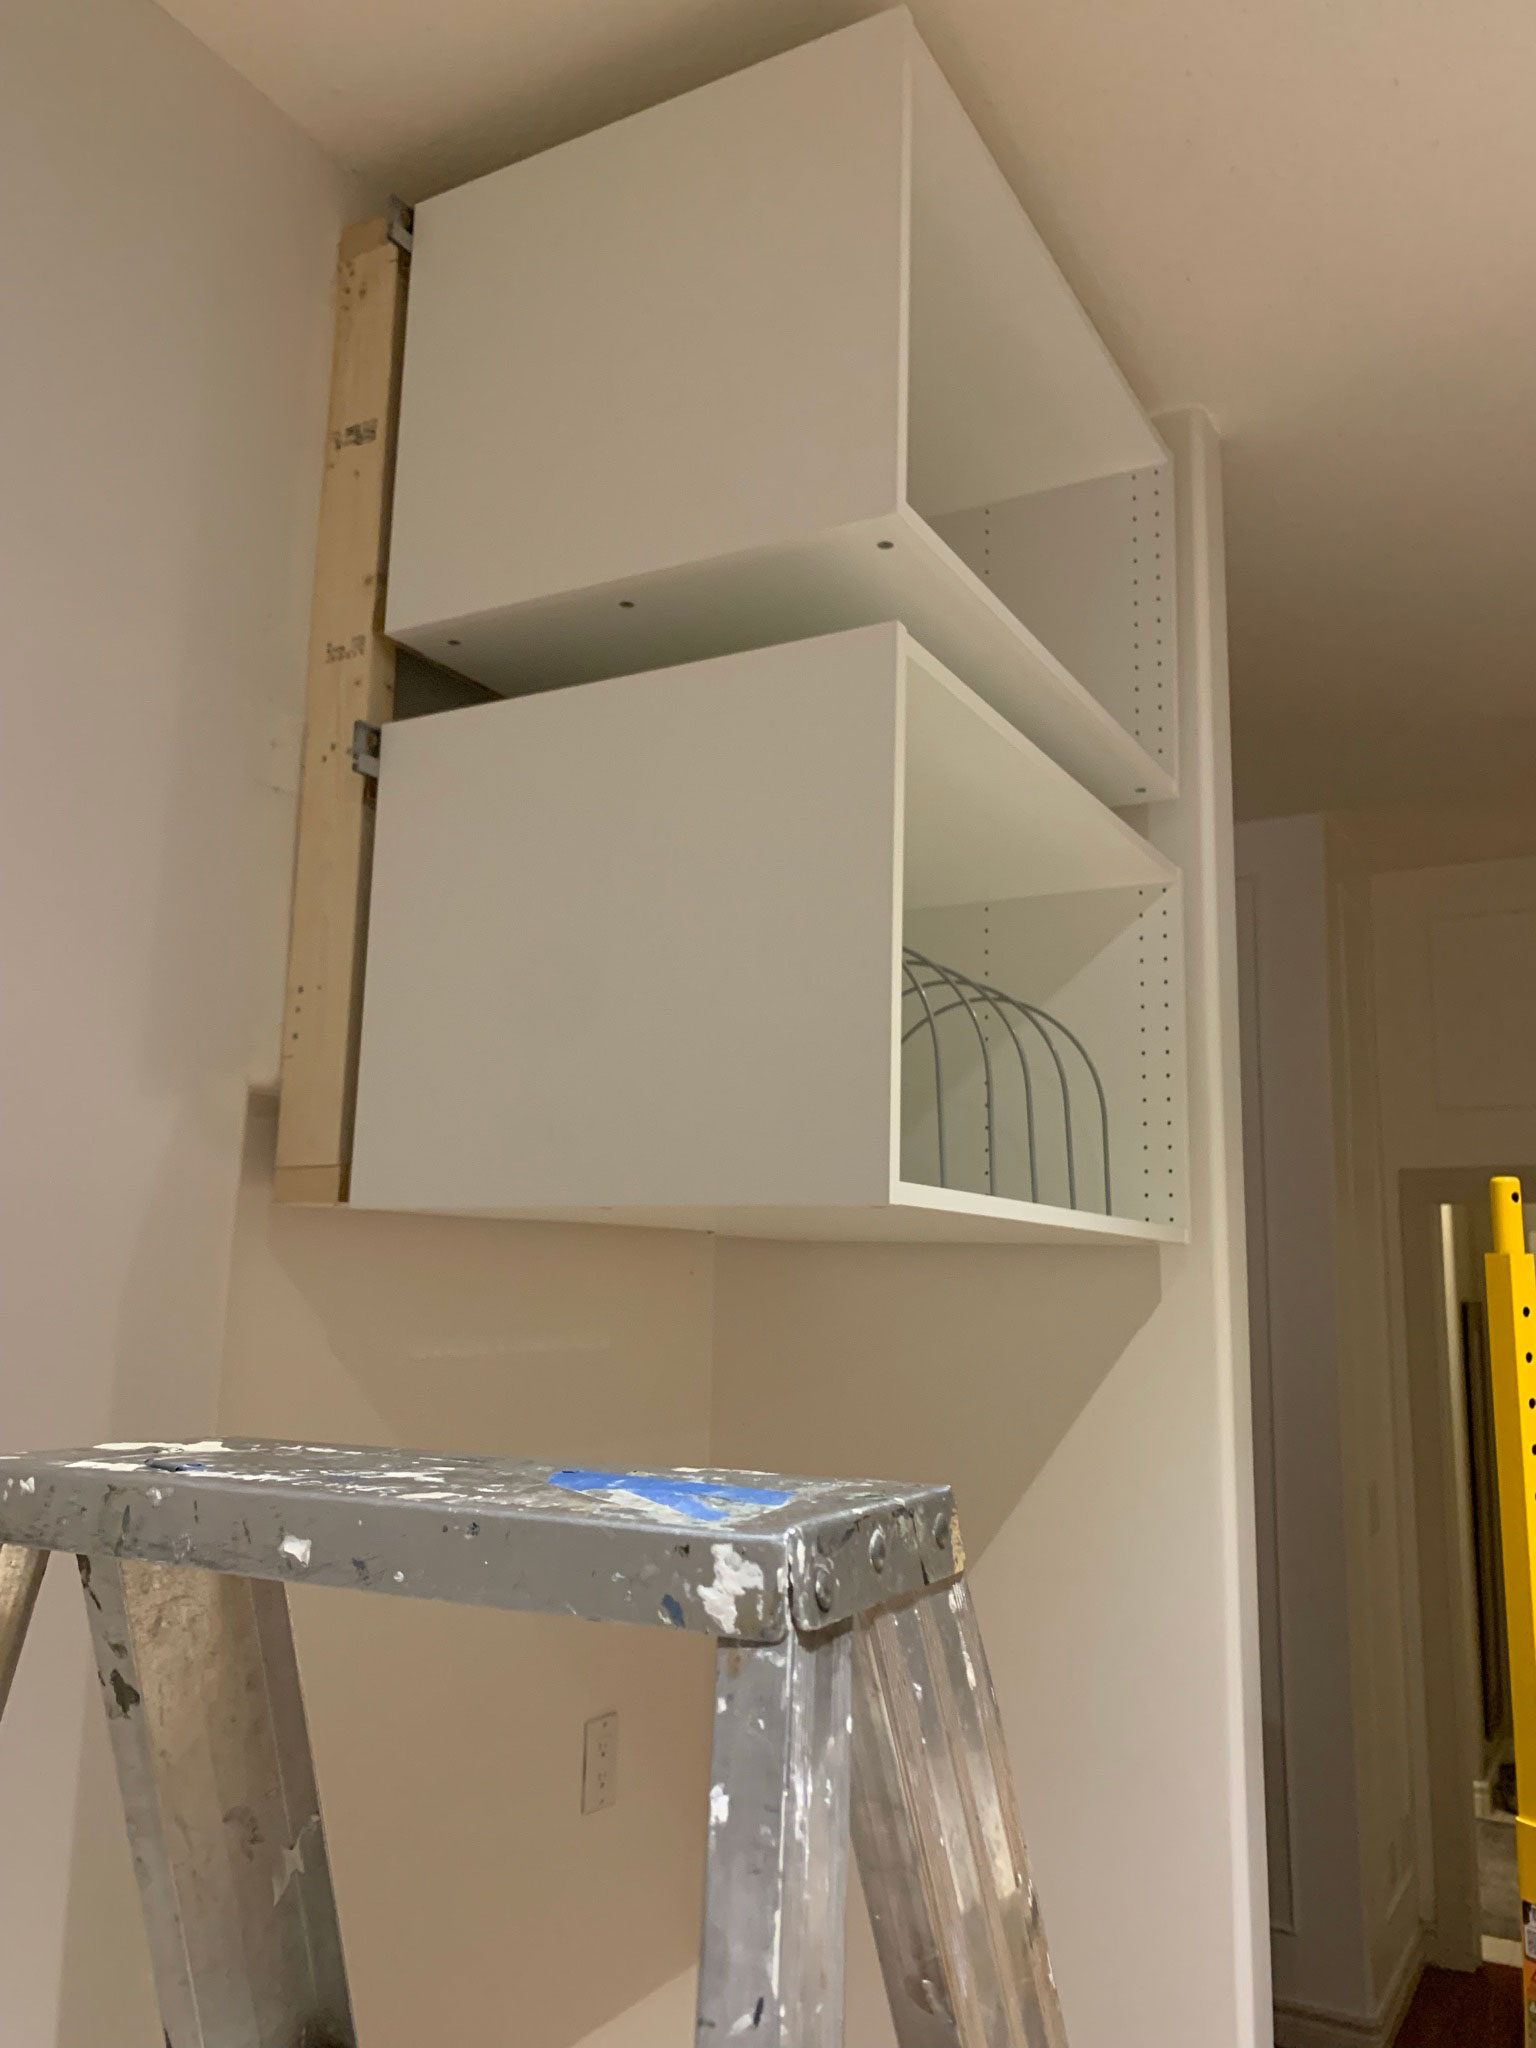 Two cabinet boxes hanging on the wall, view from the side showing framing set behind in order to make refridgerator look more built in